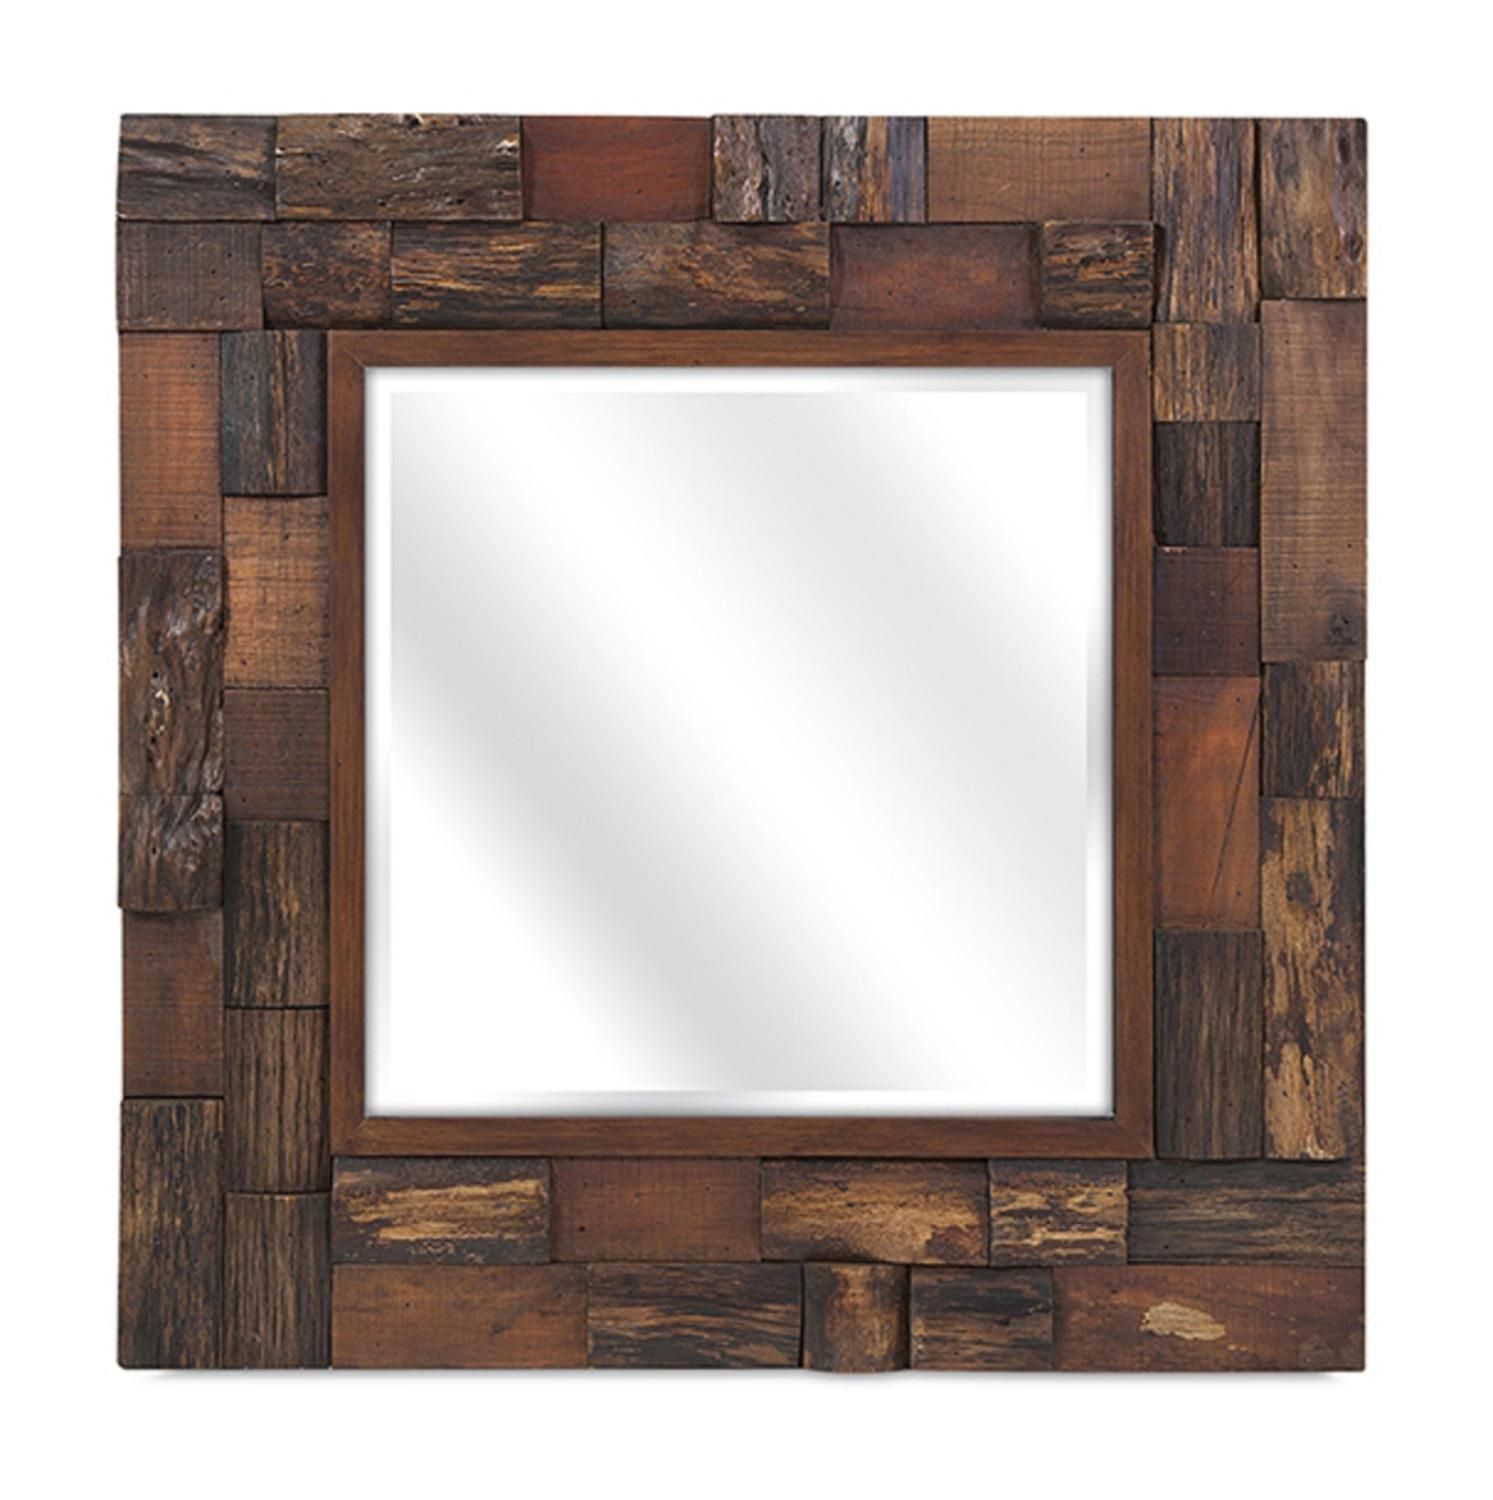 30" Rustic Masculine Baker Wood Finish Slat Square Beveled Wall Mirror With Regard To Rustic Getaway Wood Wall Mirrors (Photo 3 of 15)